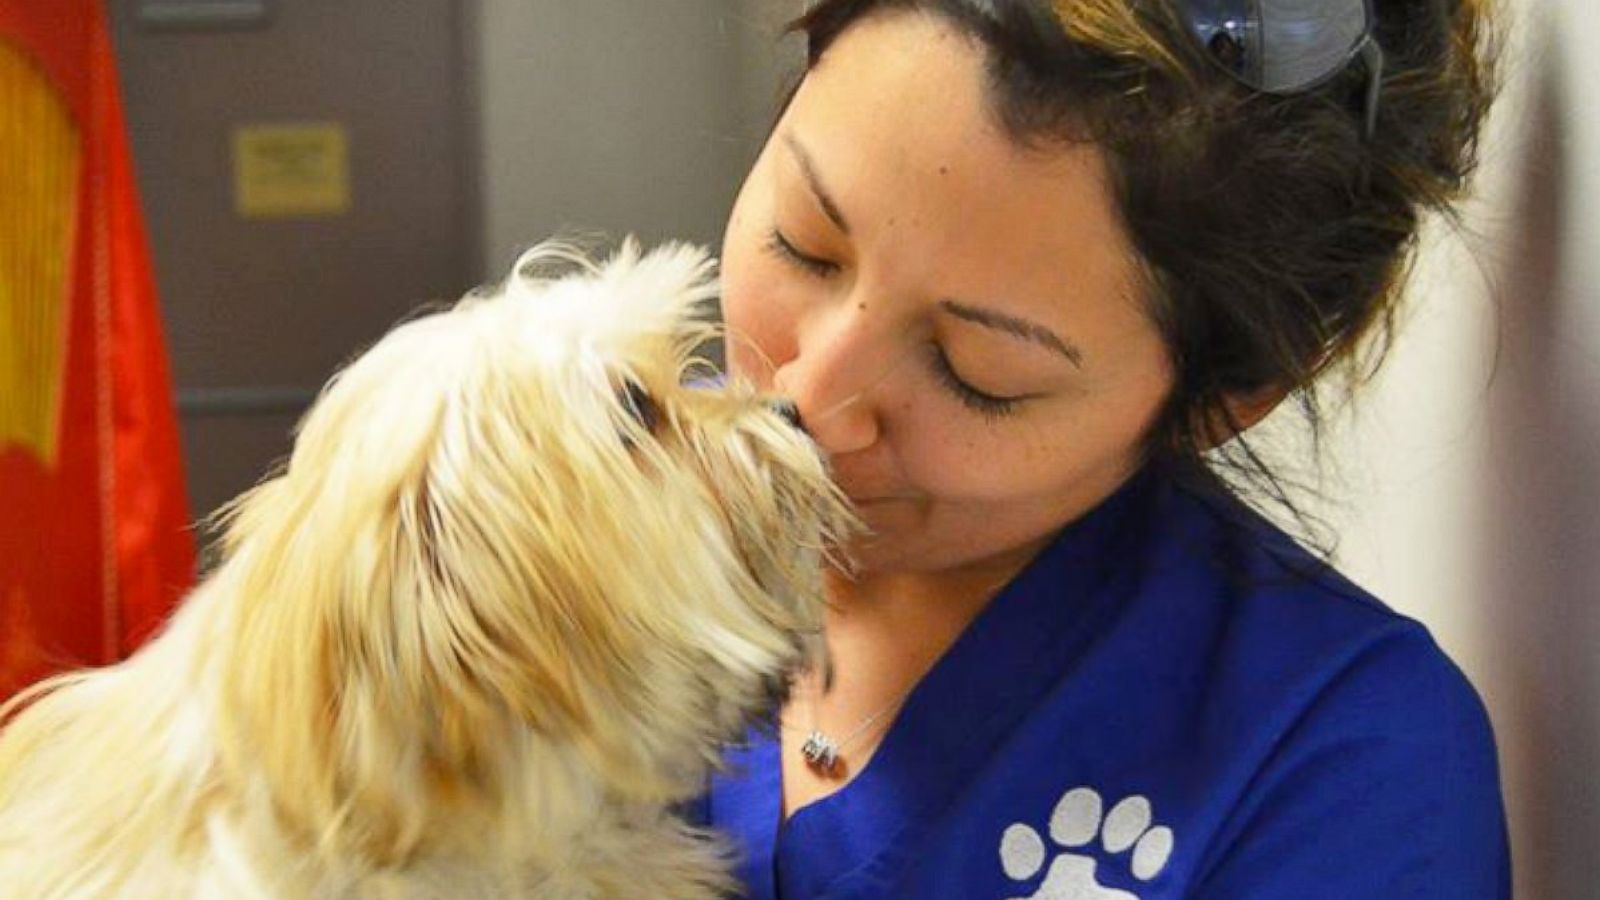 Outpouring of Support for Shelter Animals Stuck in Texas Floods - ABC News